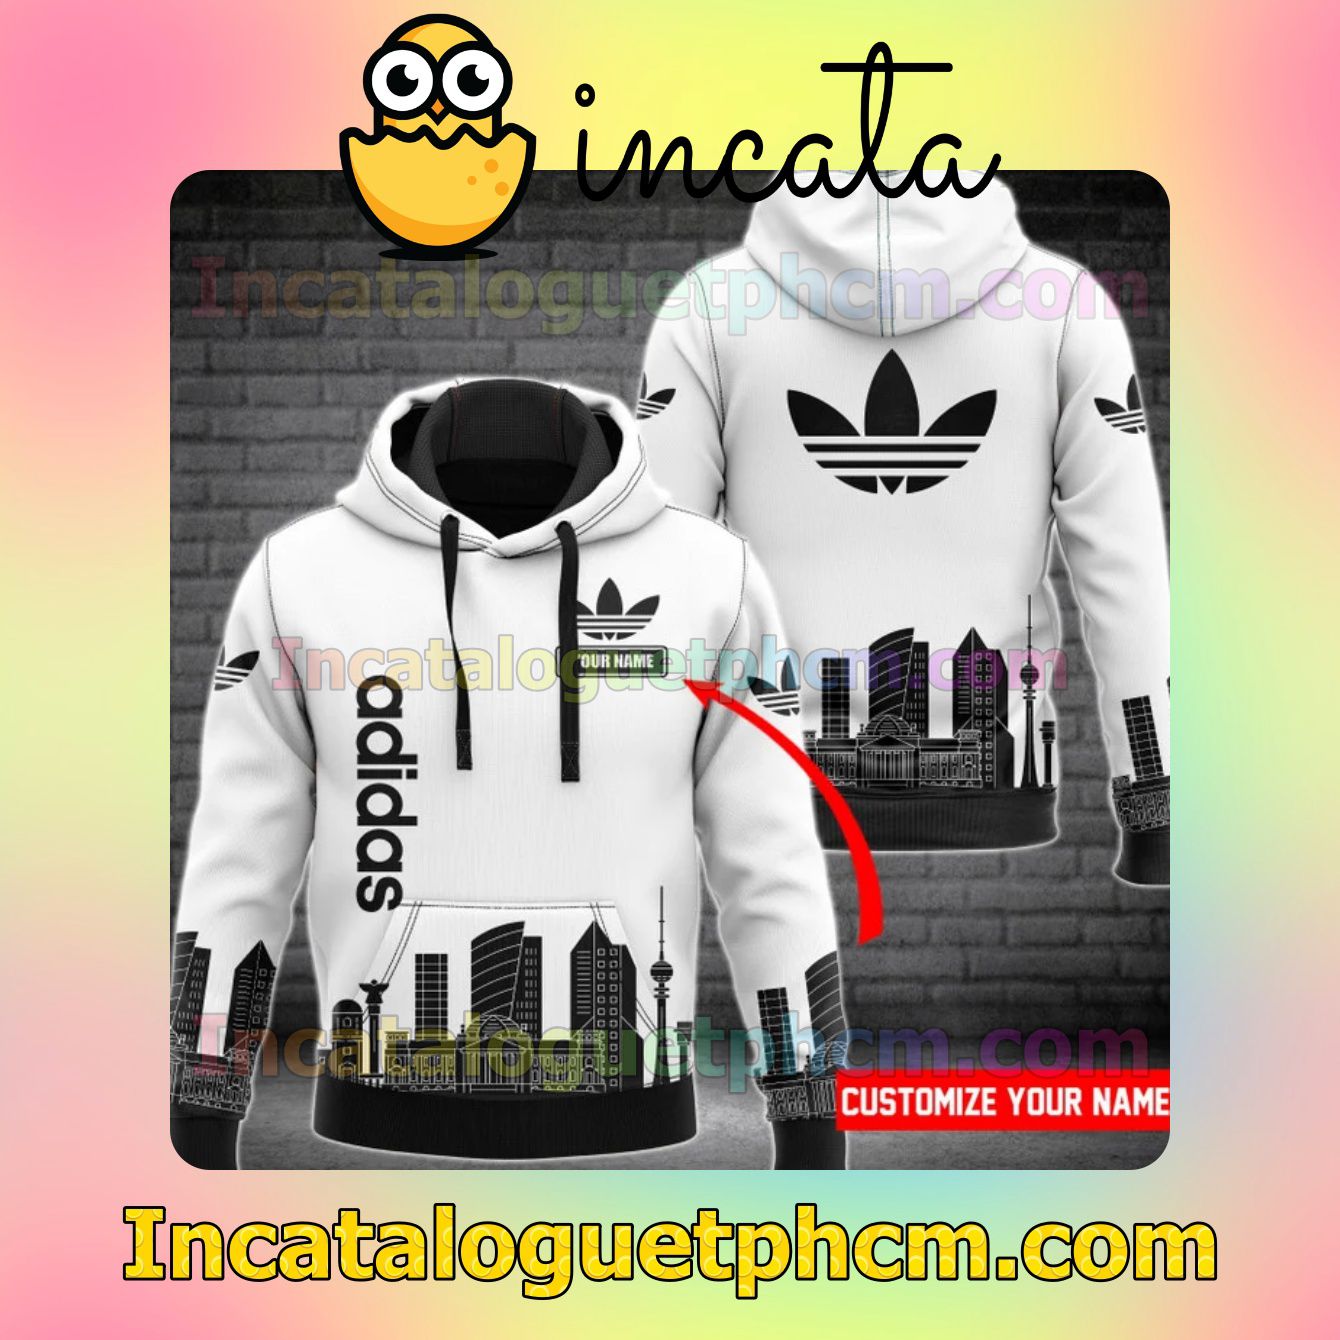 Where To Buy Personalized Adidas City Skyline Silhouette White Zipper Hooded Sweatshirt And Pants